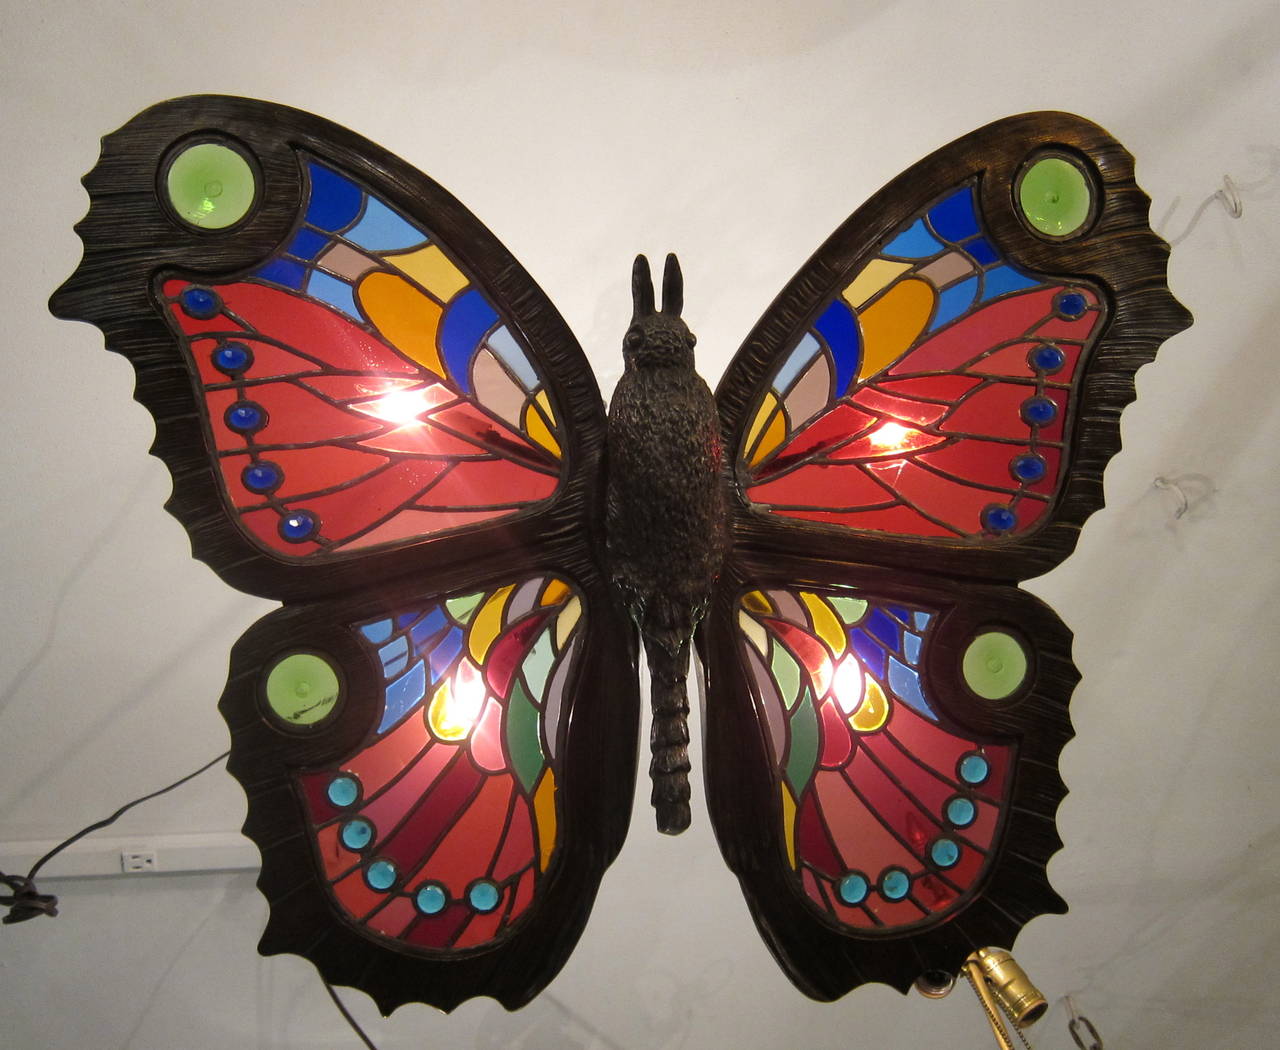 This wonderful, large butterfly fixture has intricate stained and jeweled glass panels within the sculptured bronze framework of its wings. The bronze body
of the butterfly is well defined and artistically rendered. The reverse of the body displays